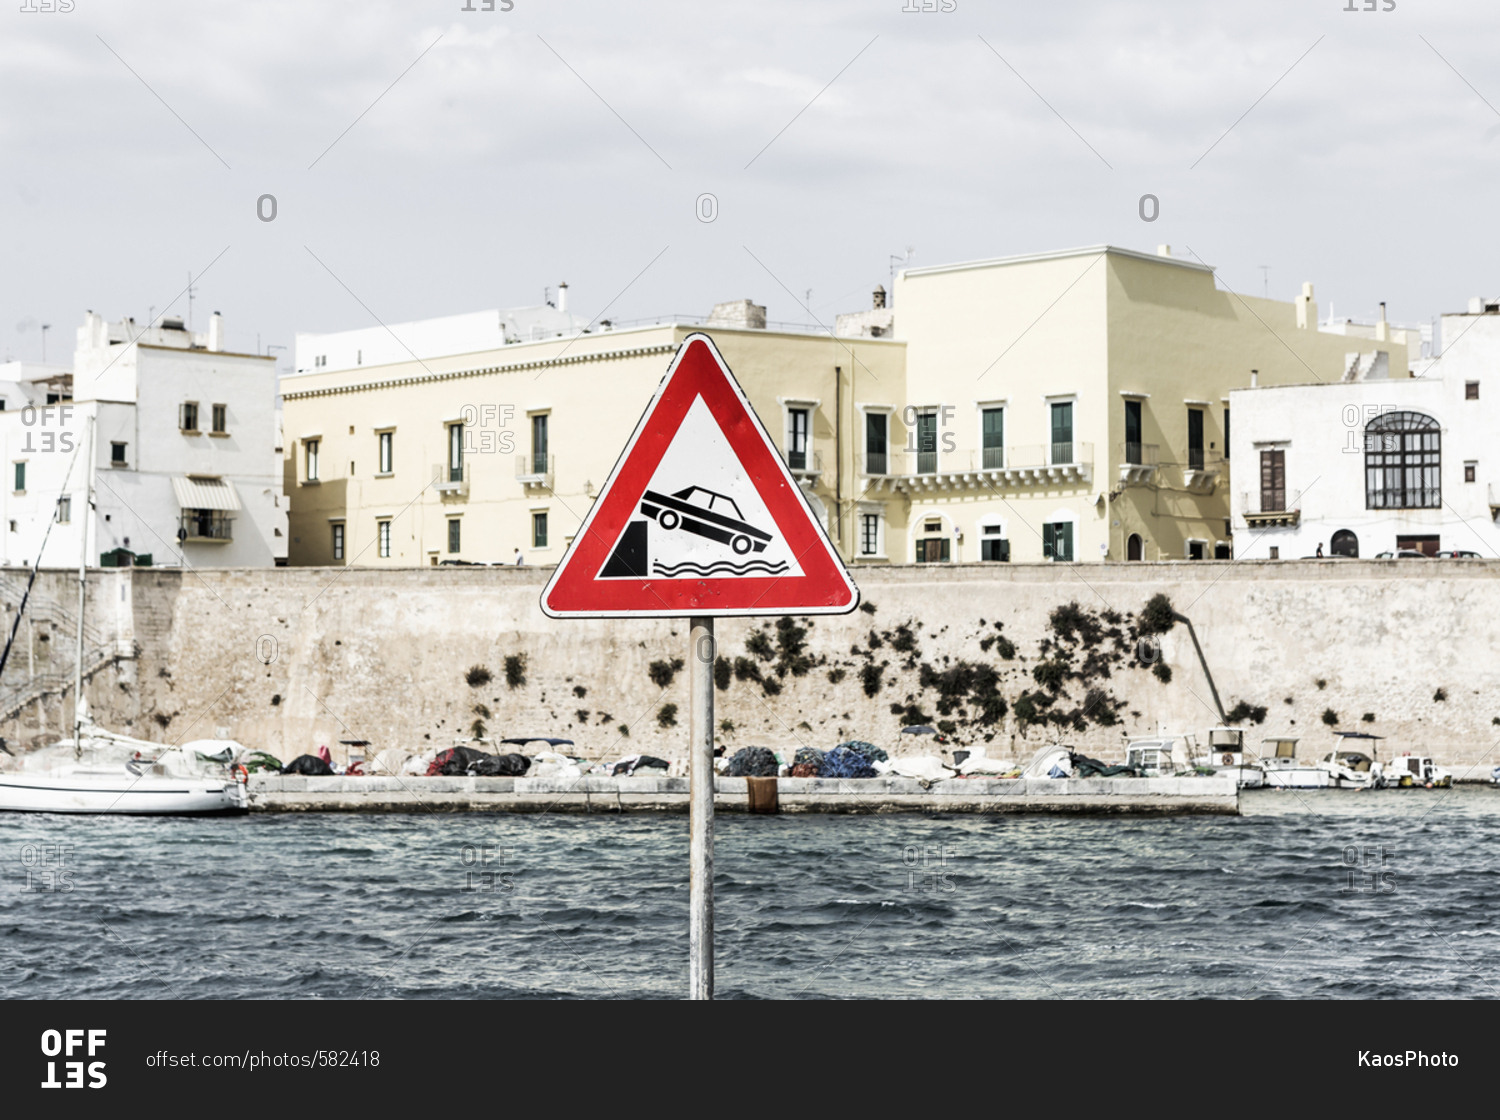 Street sign near the port, danger: car falling in water with danger road sign warning of car falling off bank